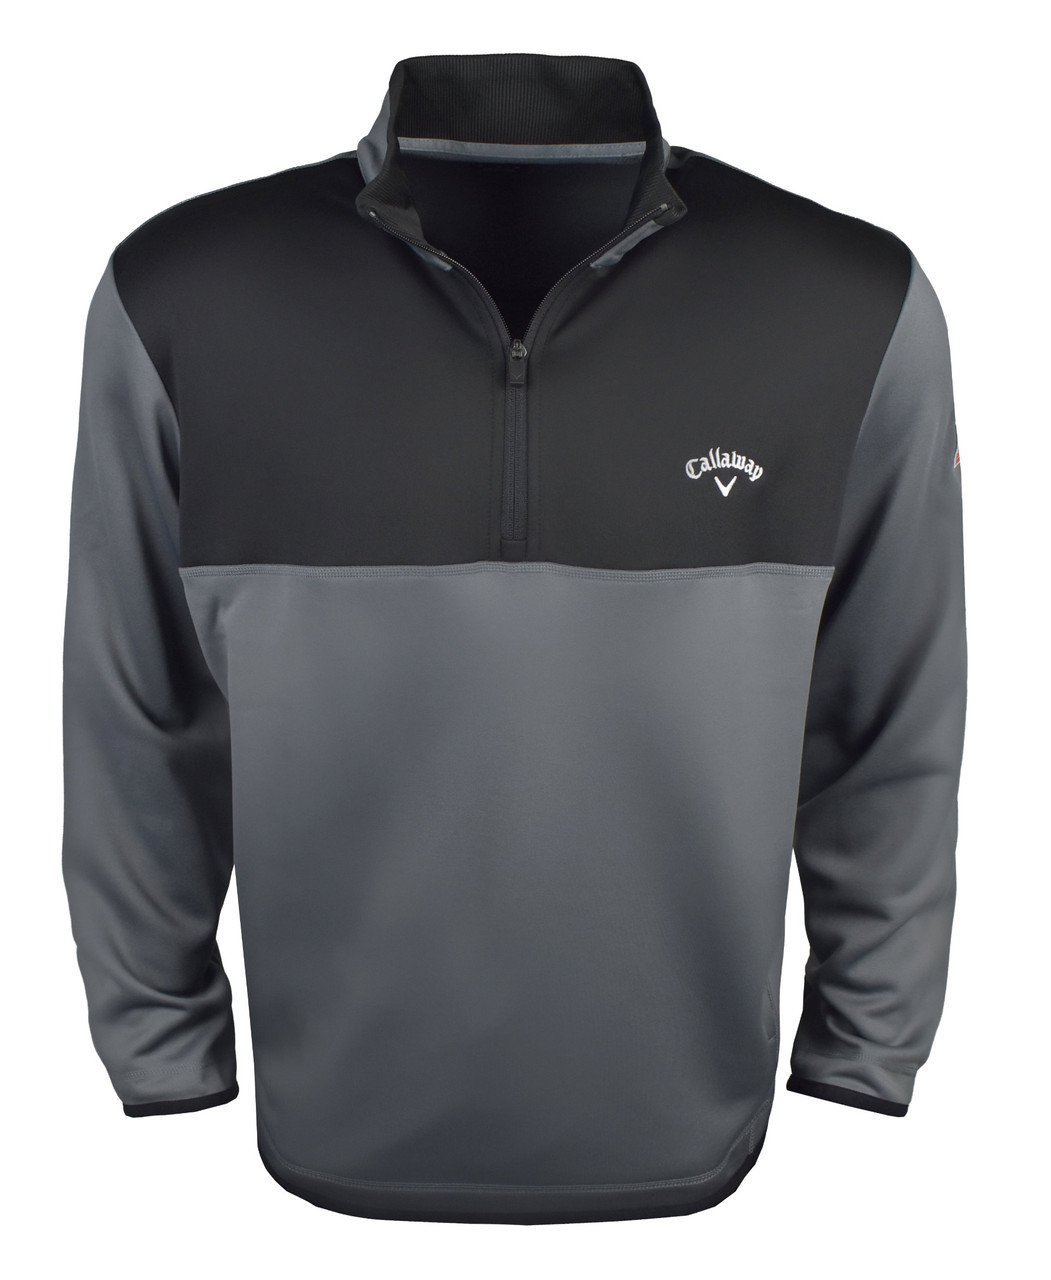 Callaway Golf 1/4 Zip Pullover With Rib Detail